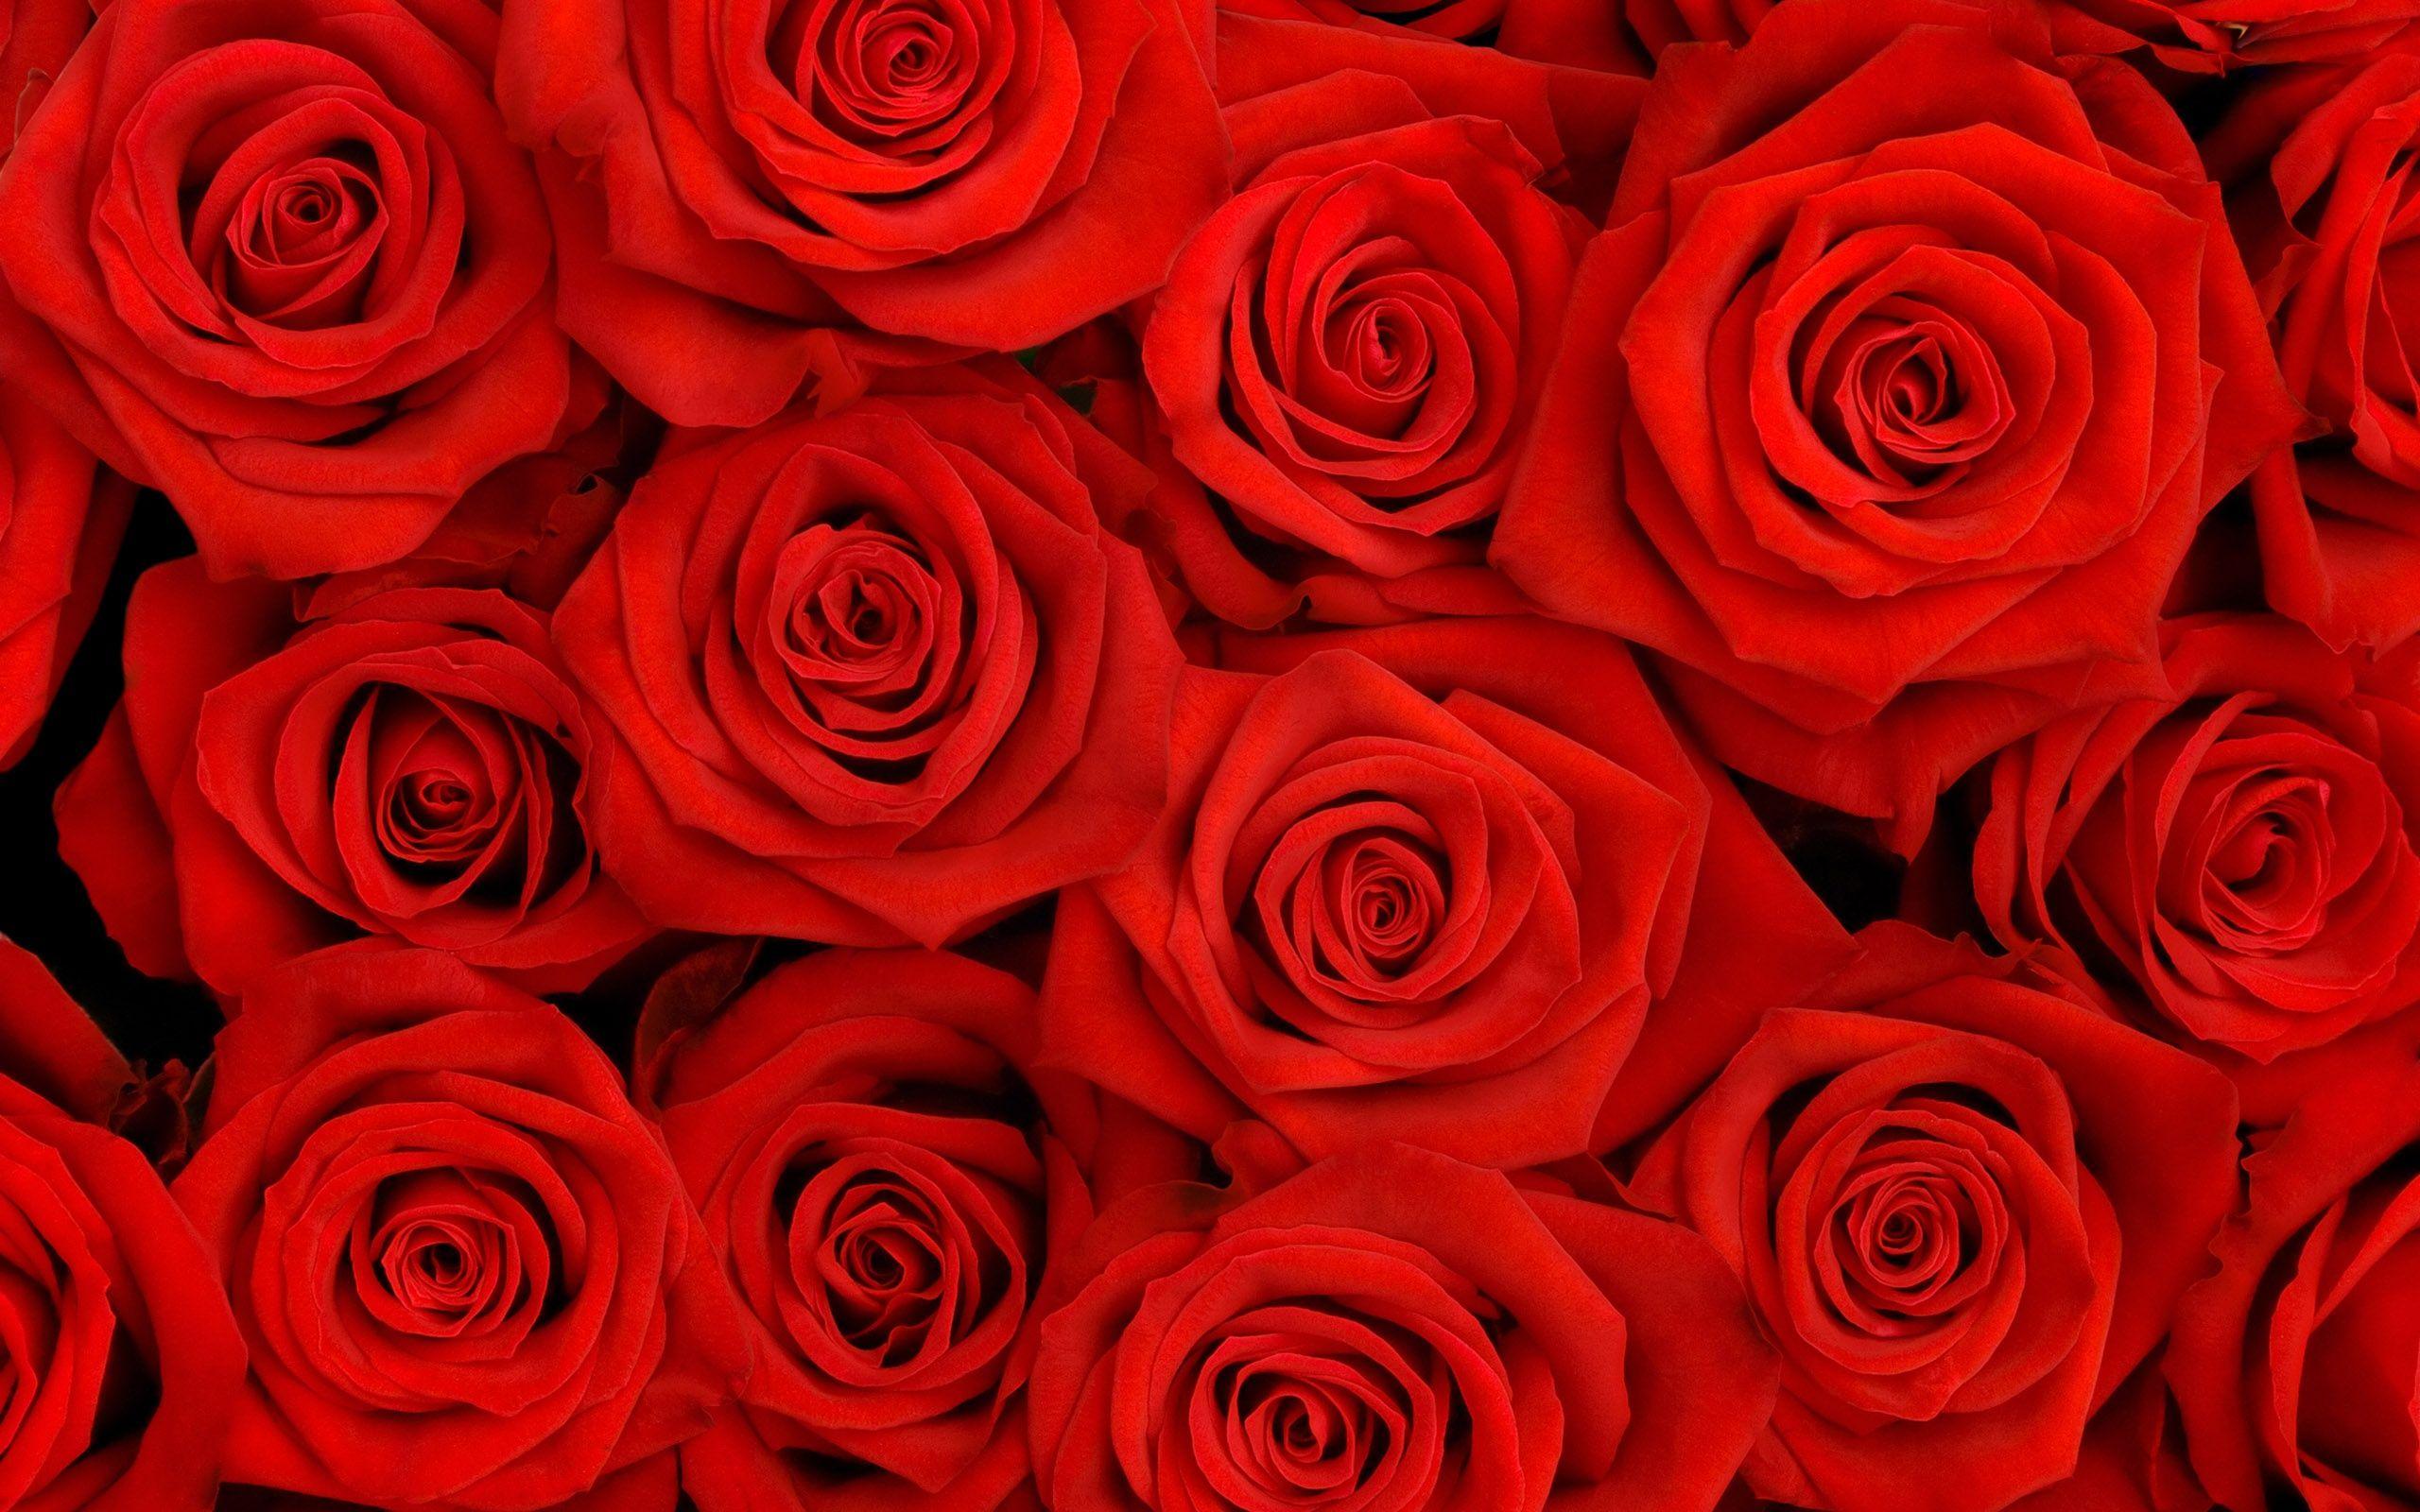 Love roses wallpaper wallpaper for free download about 369